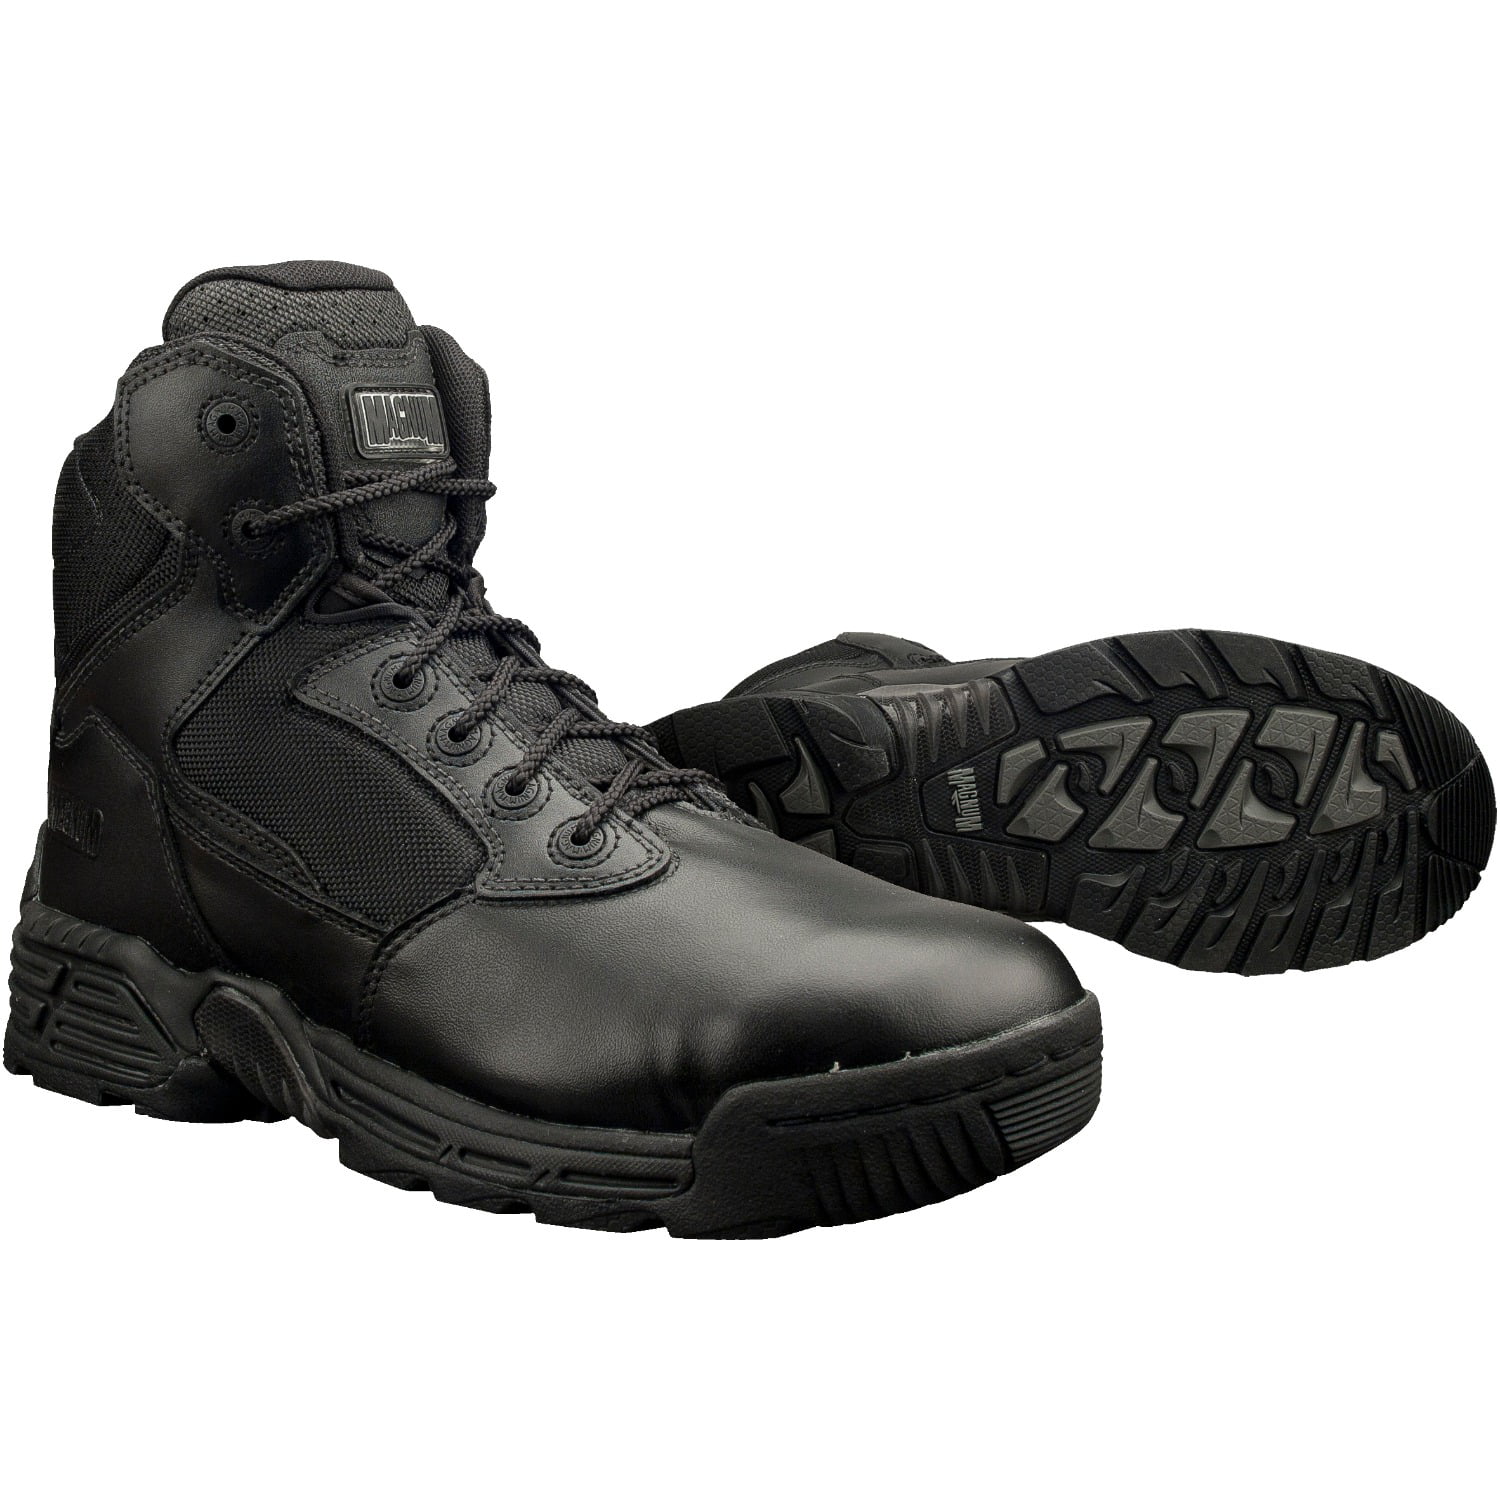 Police Army Combat Boots 5248 